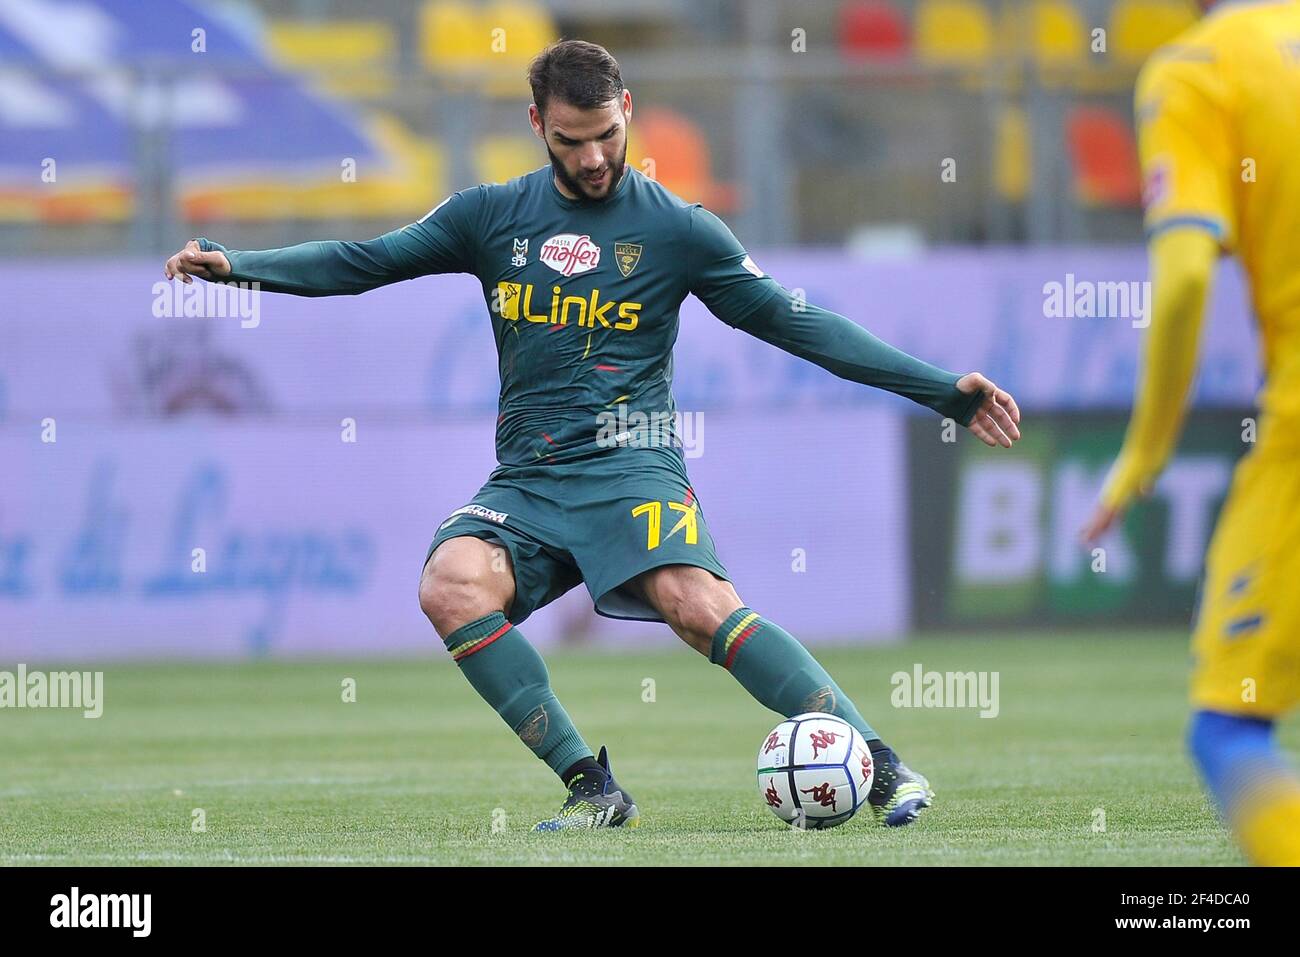 Frosinone, Italy. 20th Mar, 2021. Panagiotis Tachtsidis player of Lecce, during the match of the Italian league series B between Frosinone vs Lecce final result 0-3, match played at the Benito Stirpe stadium in Frosinone. Italy, March 20, 202. (Photo by Vincenzo Izzo/Sipa Usa) Credit: Sipa USA/Alamy Live News Stock Photo